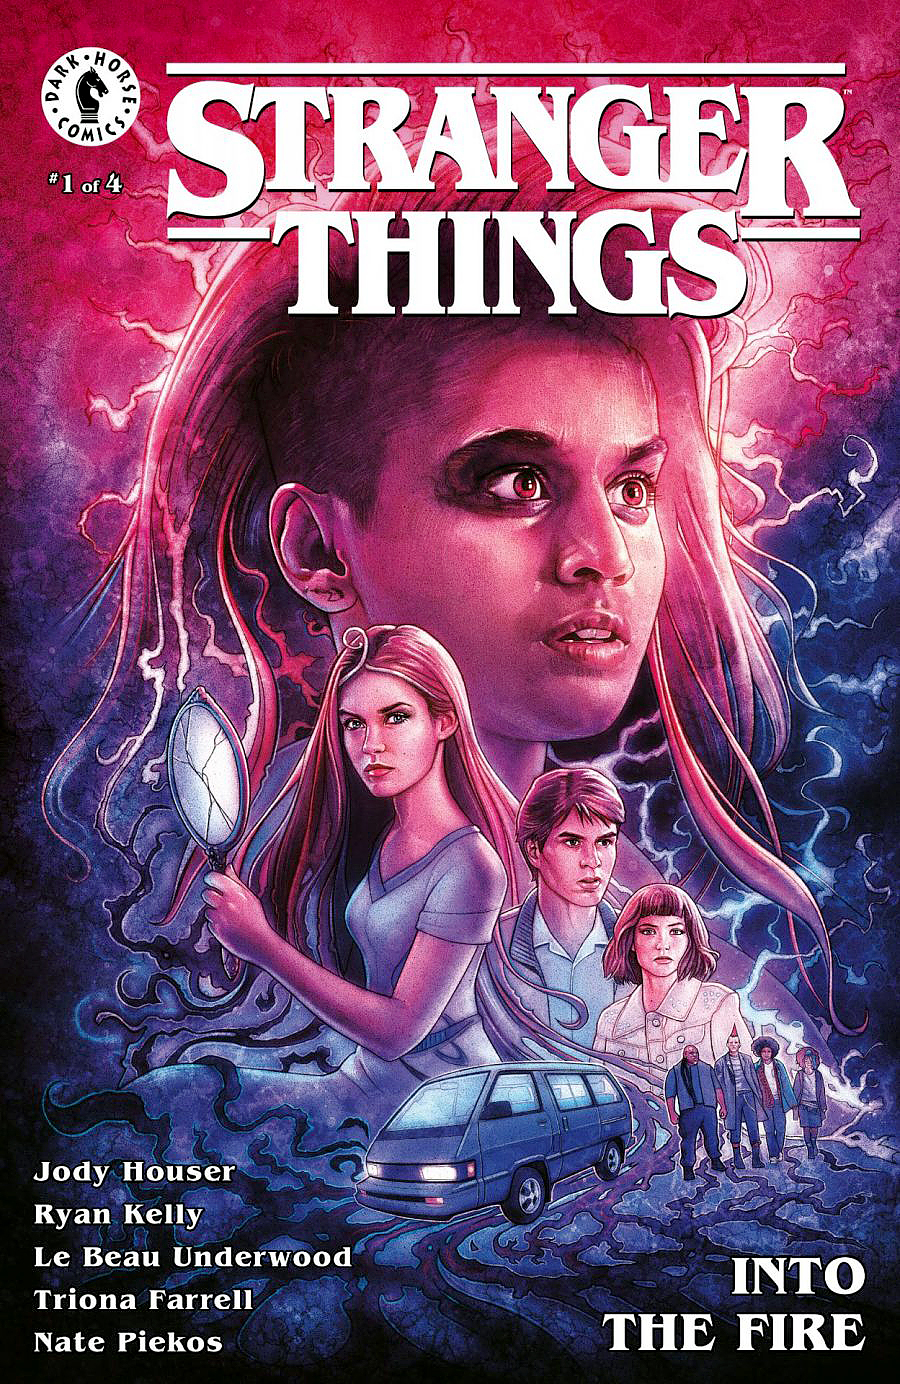 Stranger Things - Into the Fire - Series 3 Variant Cover